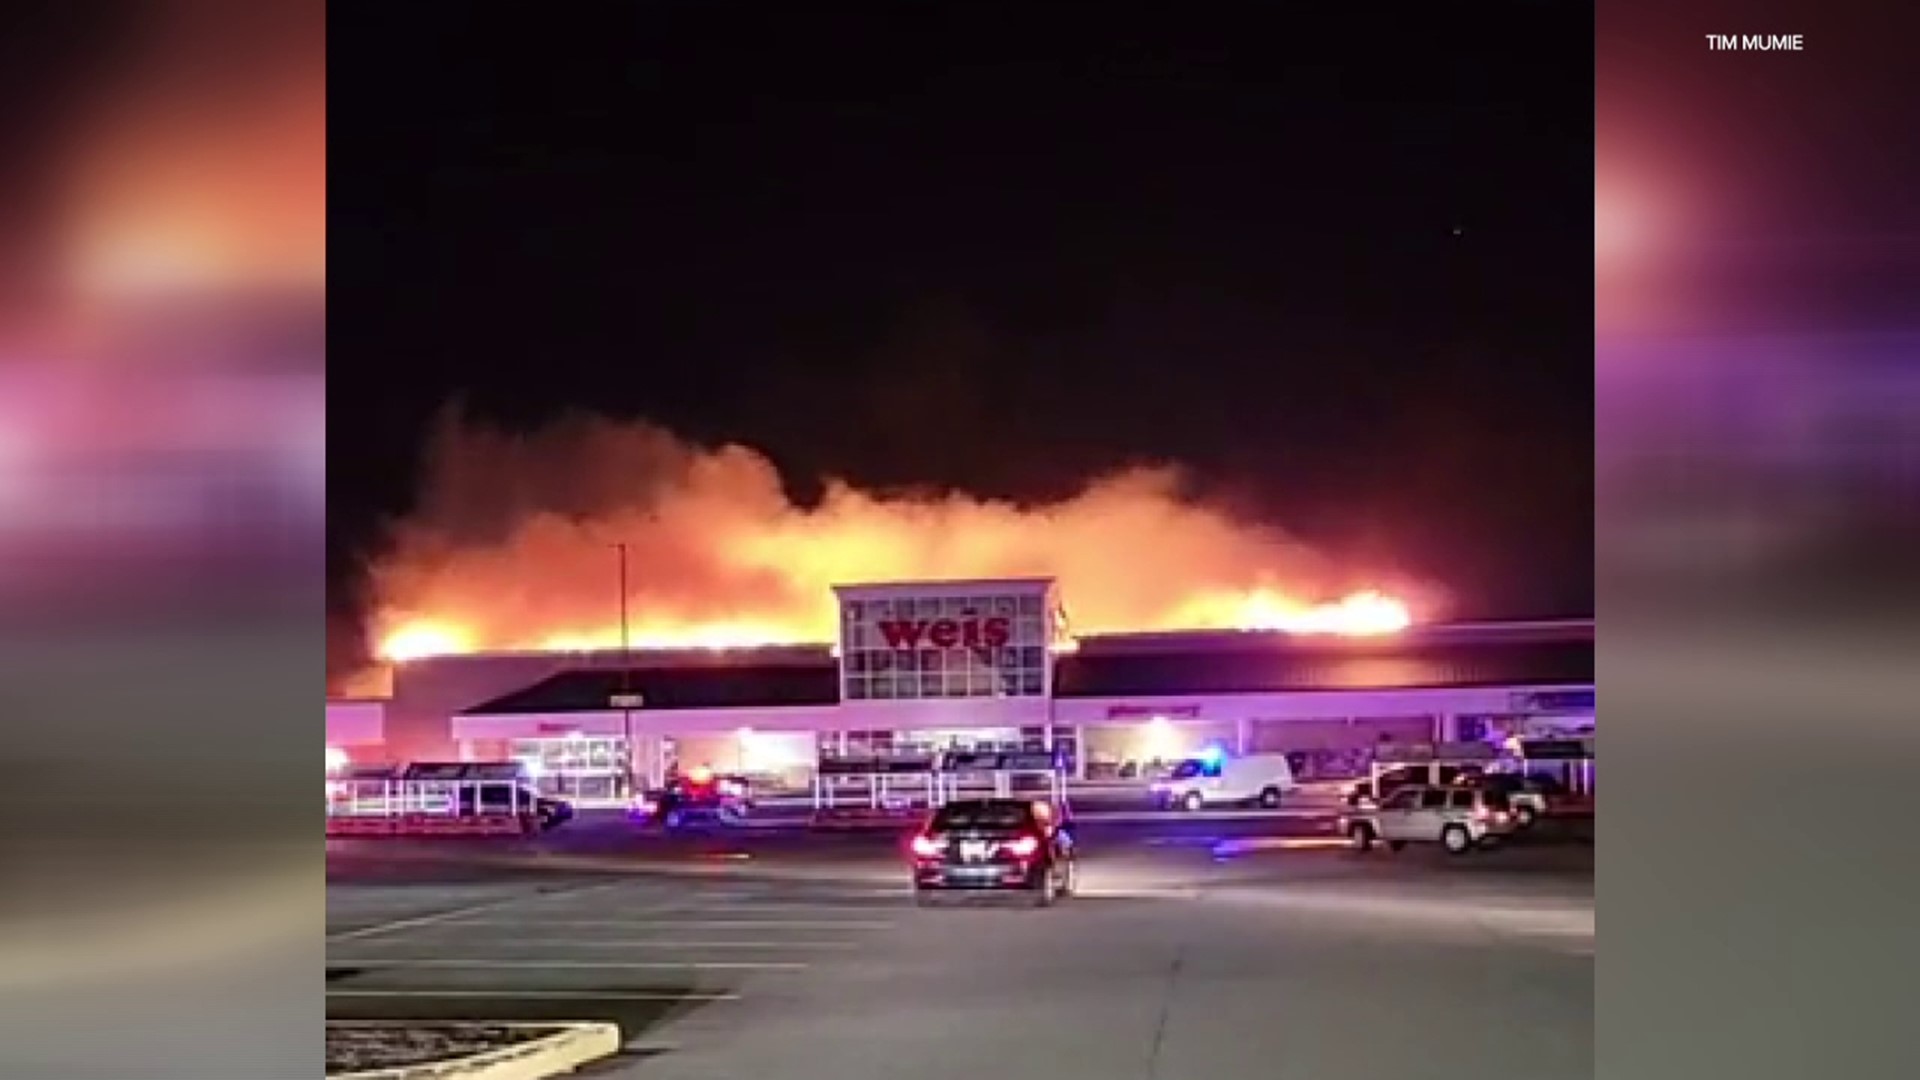 It's now up to investigators to figure out what sparked the flames that heavily damaged a grocery store in Luzerne County.